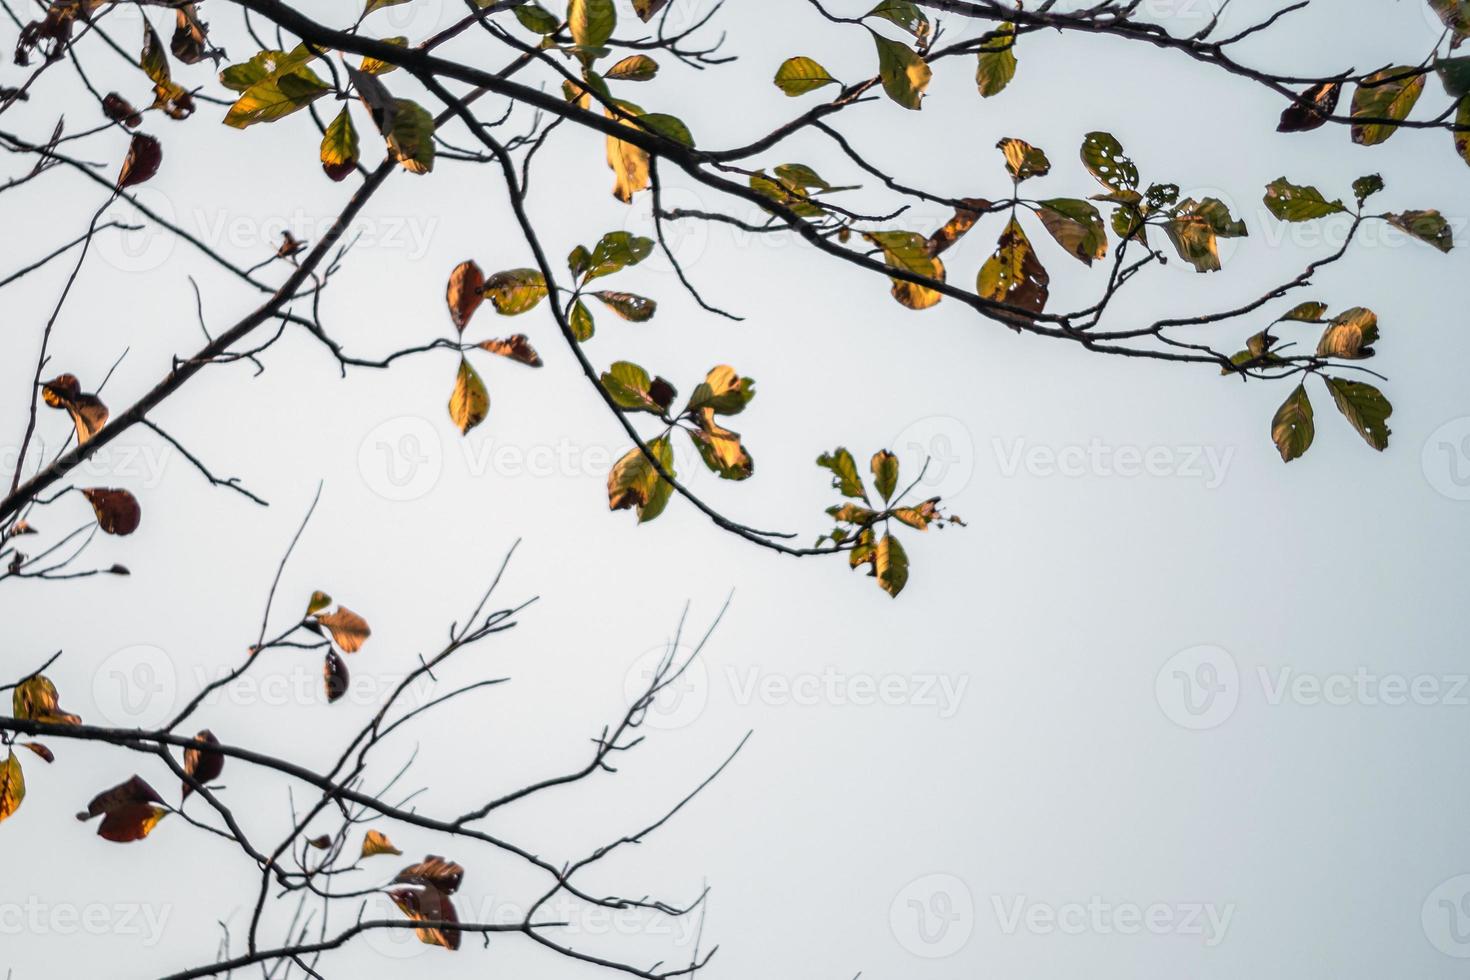 The tops of the teak trees shed their leaves in the dry season photo